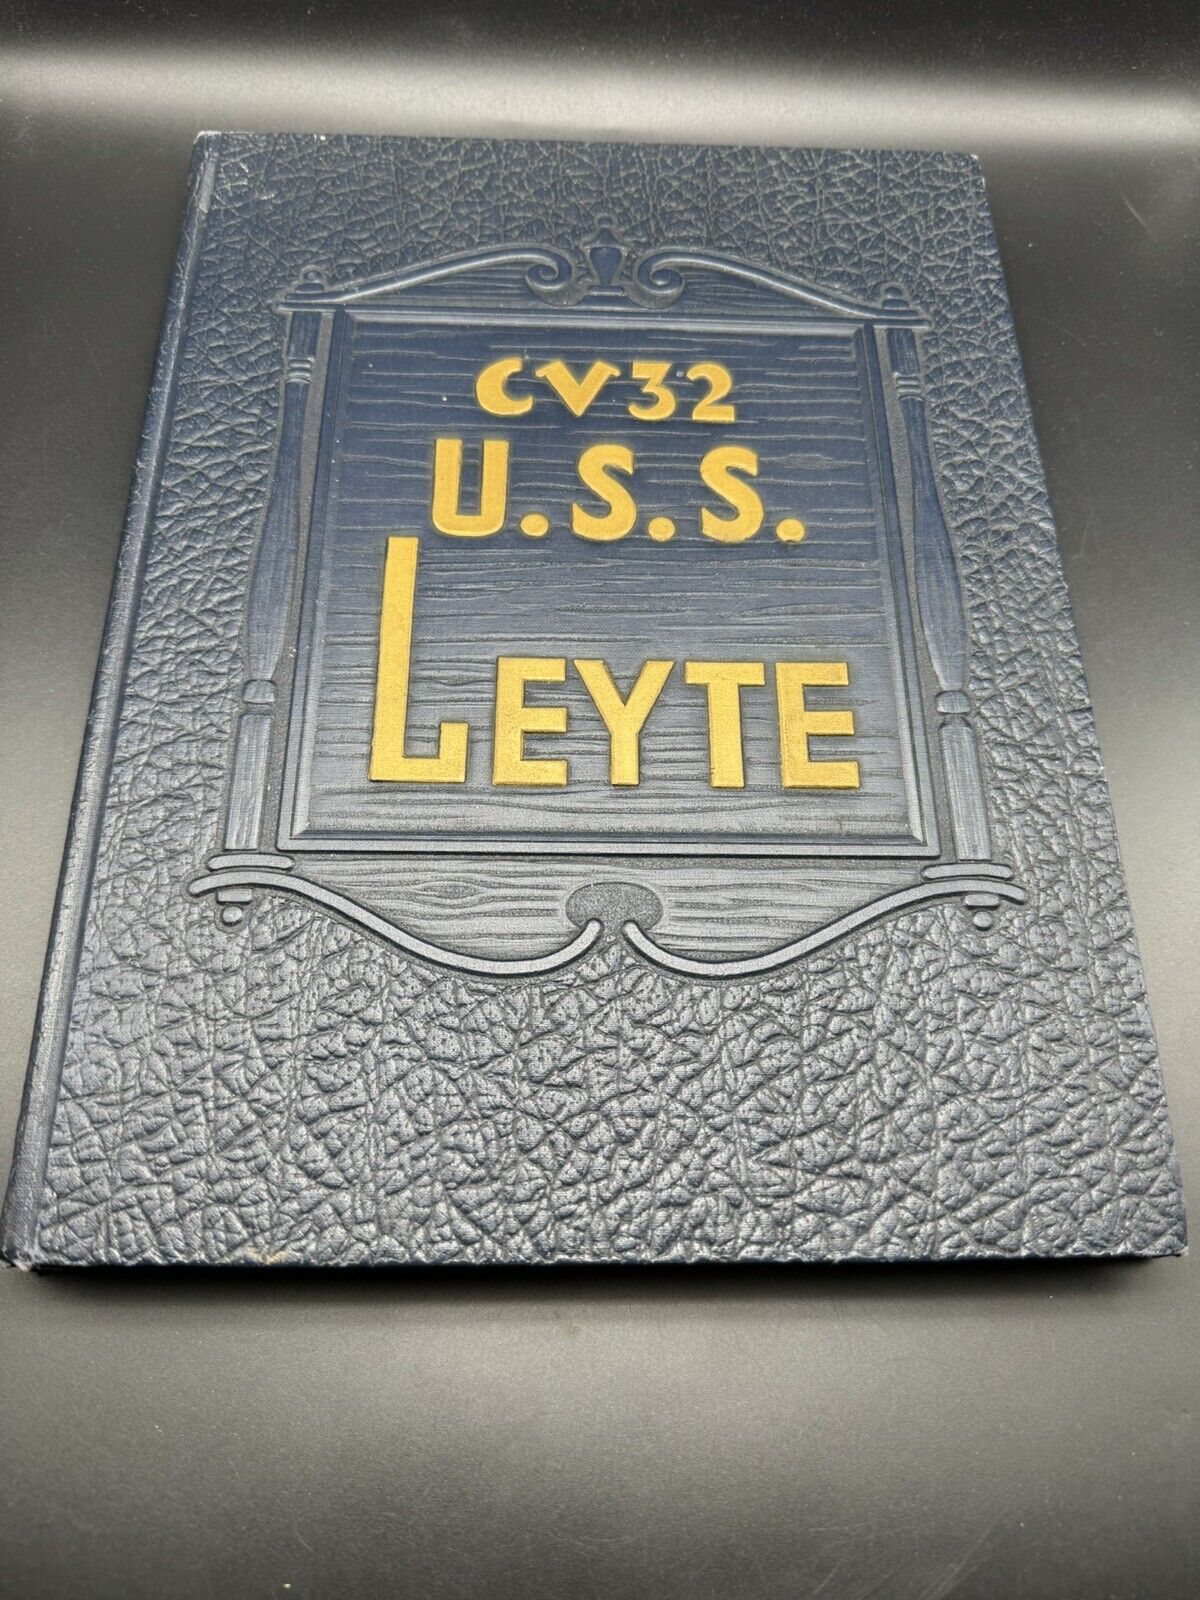 U.S.S. Leyte CV32 Shakedown Cruise Book 1946 MINT CONDITION